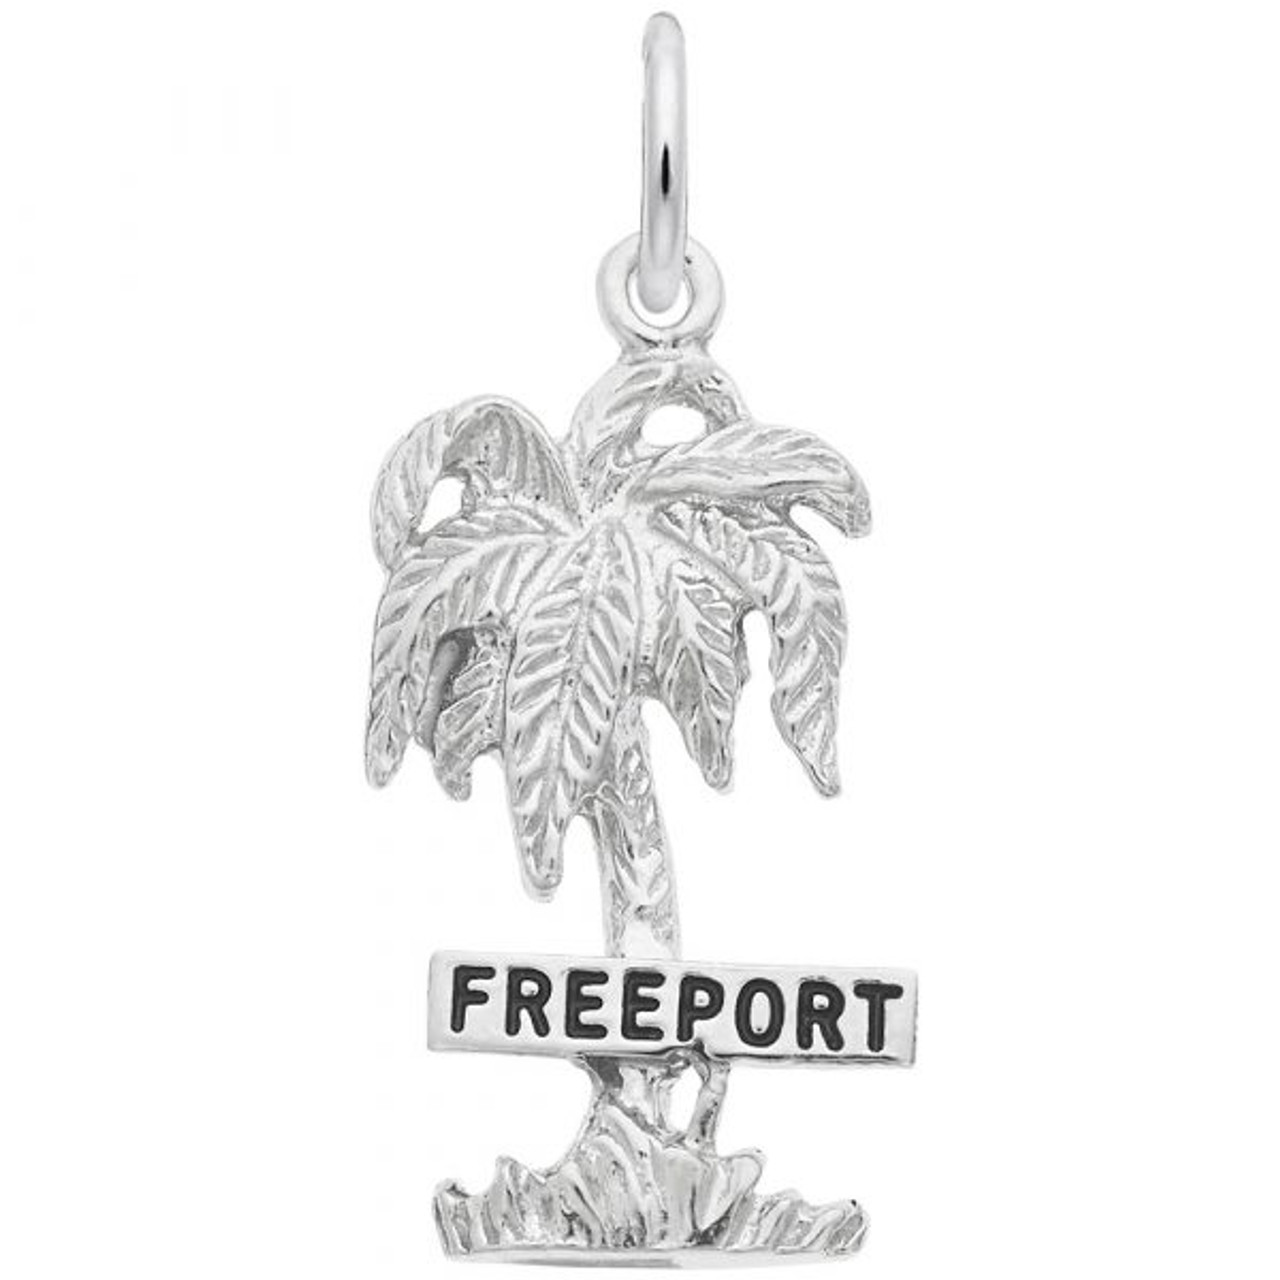 "Freeport" Palm Tree Charm - Sterling Silver and 14k White Gold